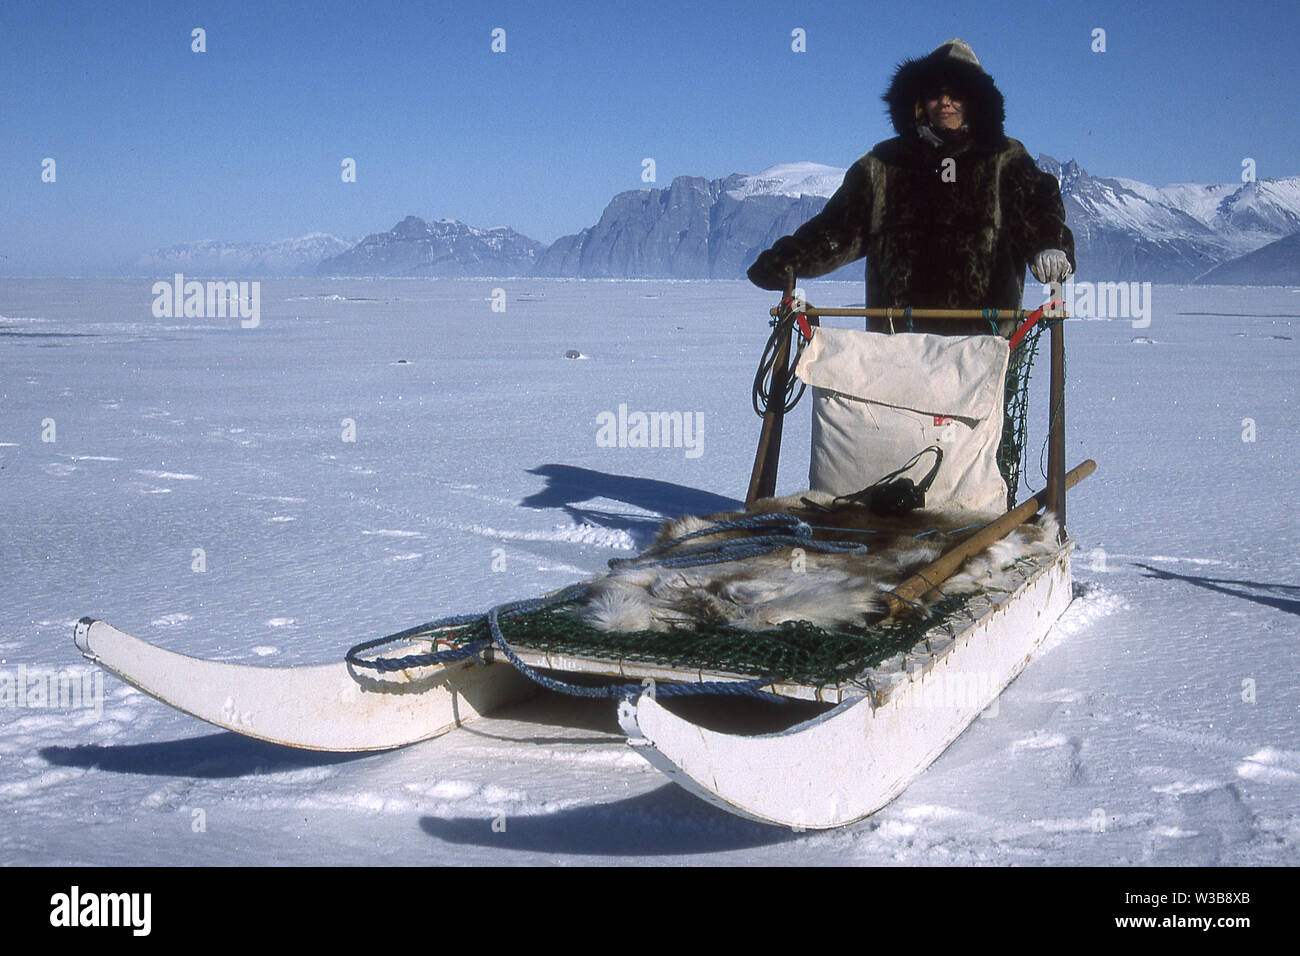 TOURIST IN SEALSKIN OUTFIT FOR DOG SLED RIDE ON THE FROZEN SEA ICE IN GREENLAND. Stock Photo